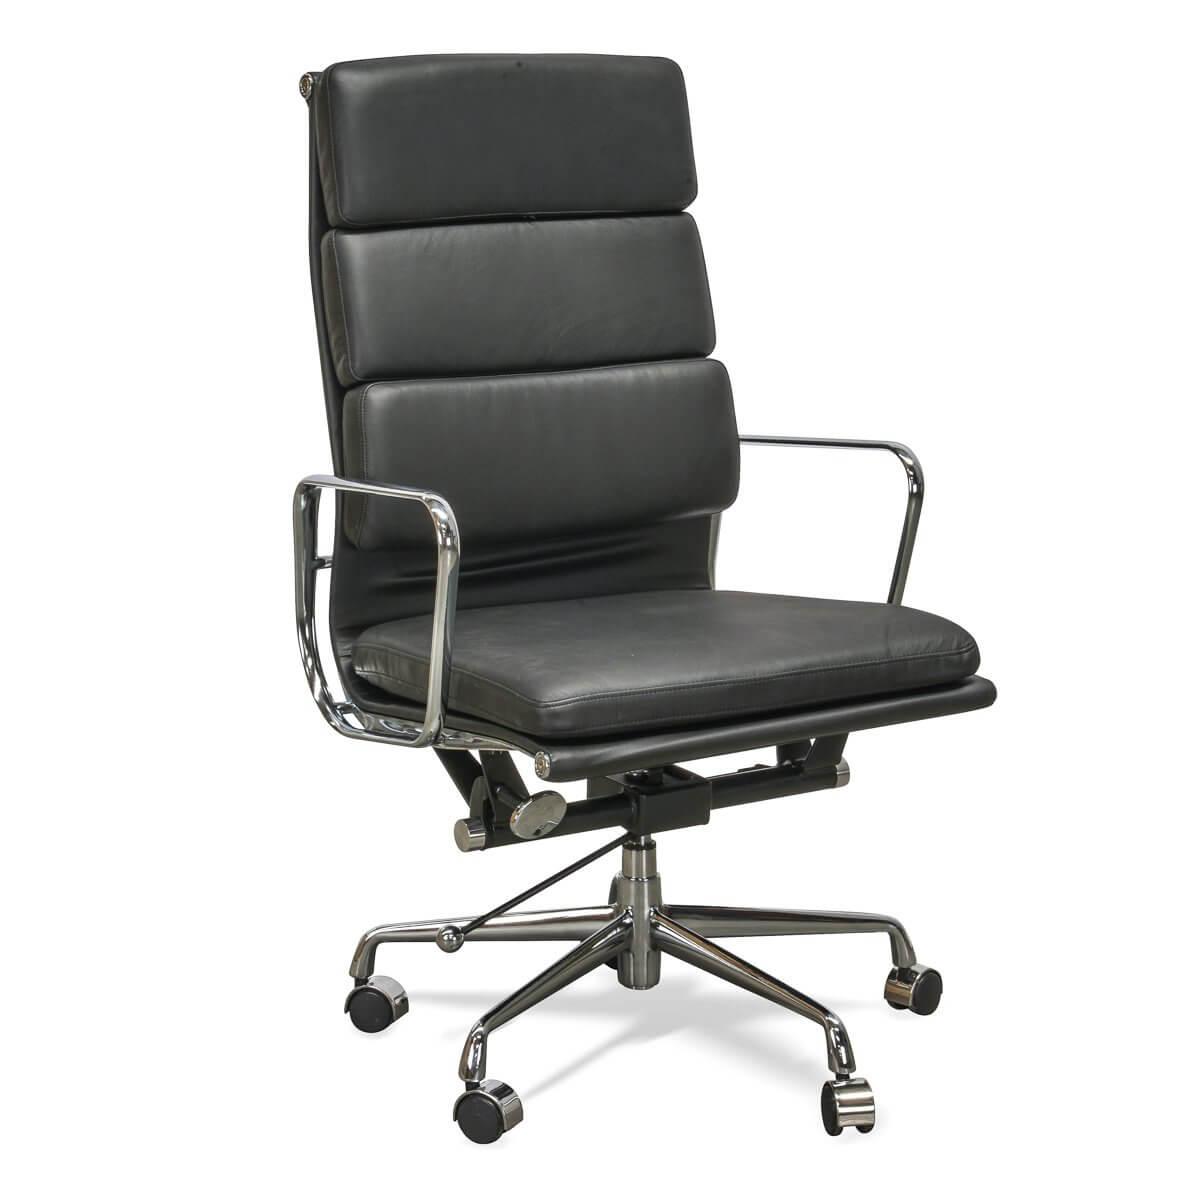 Calibre Soft Pad Office Chair - Black OC104-Office/Gaming Chairs-Calibre-Prime Furniture